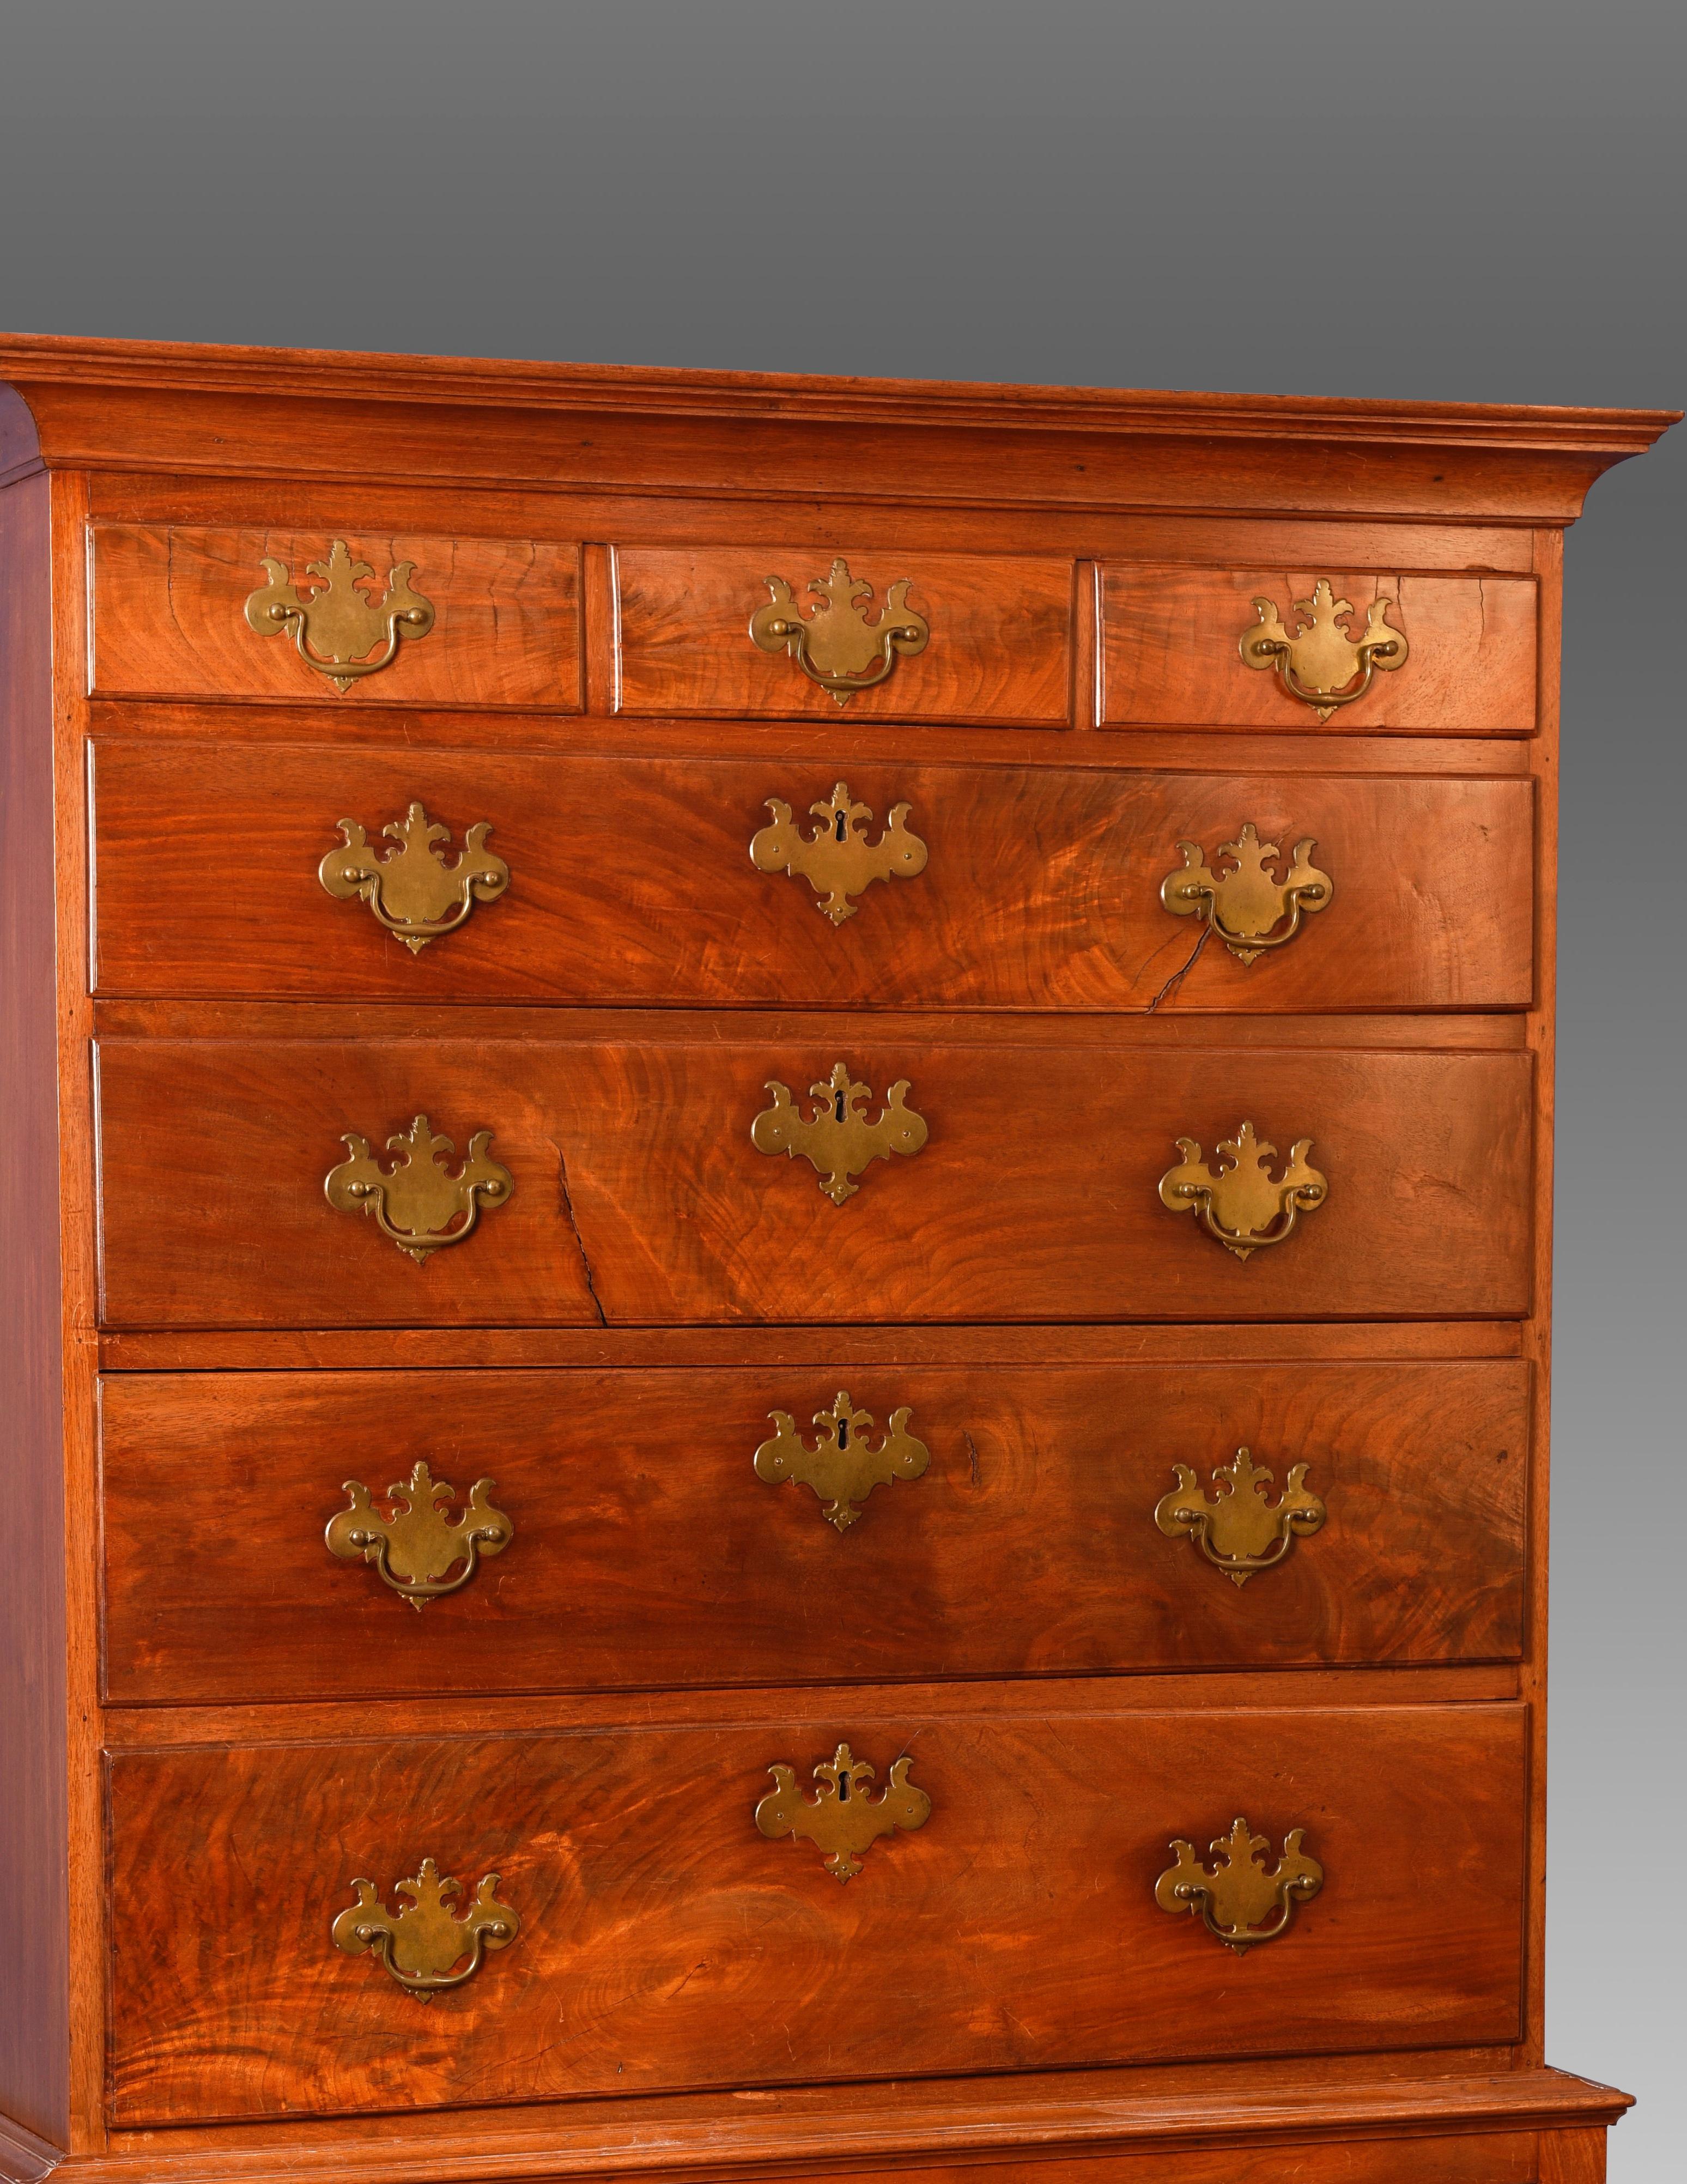 Walnut Queen Anne highboy with lovely figured wood drawer fronts. Nicely scalloped aprons and cabriole legs terminating in trifid feet.